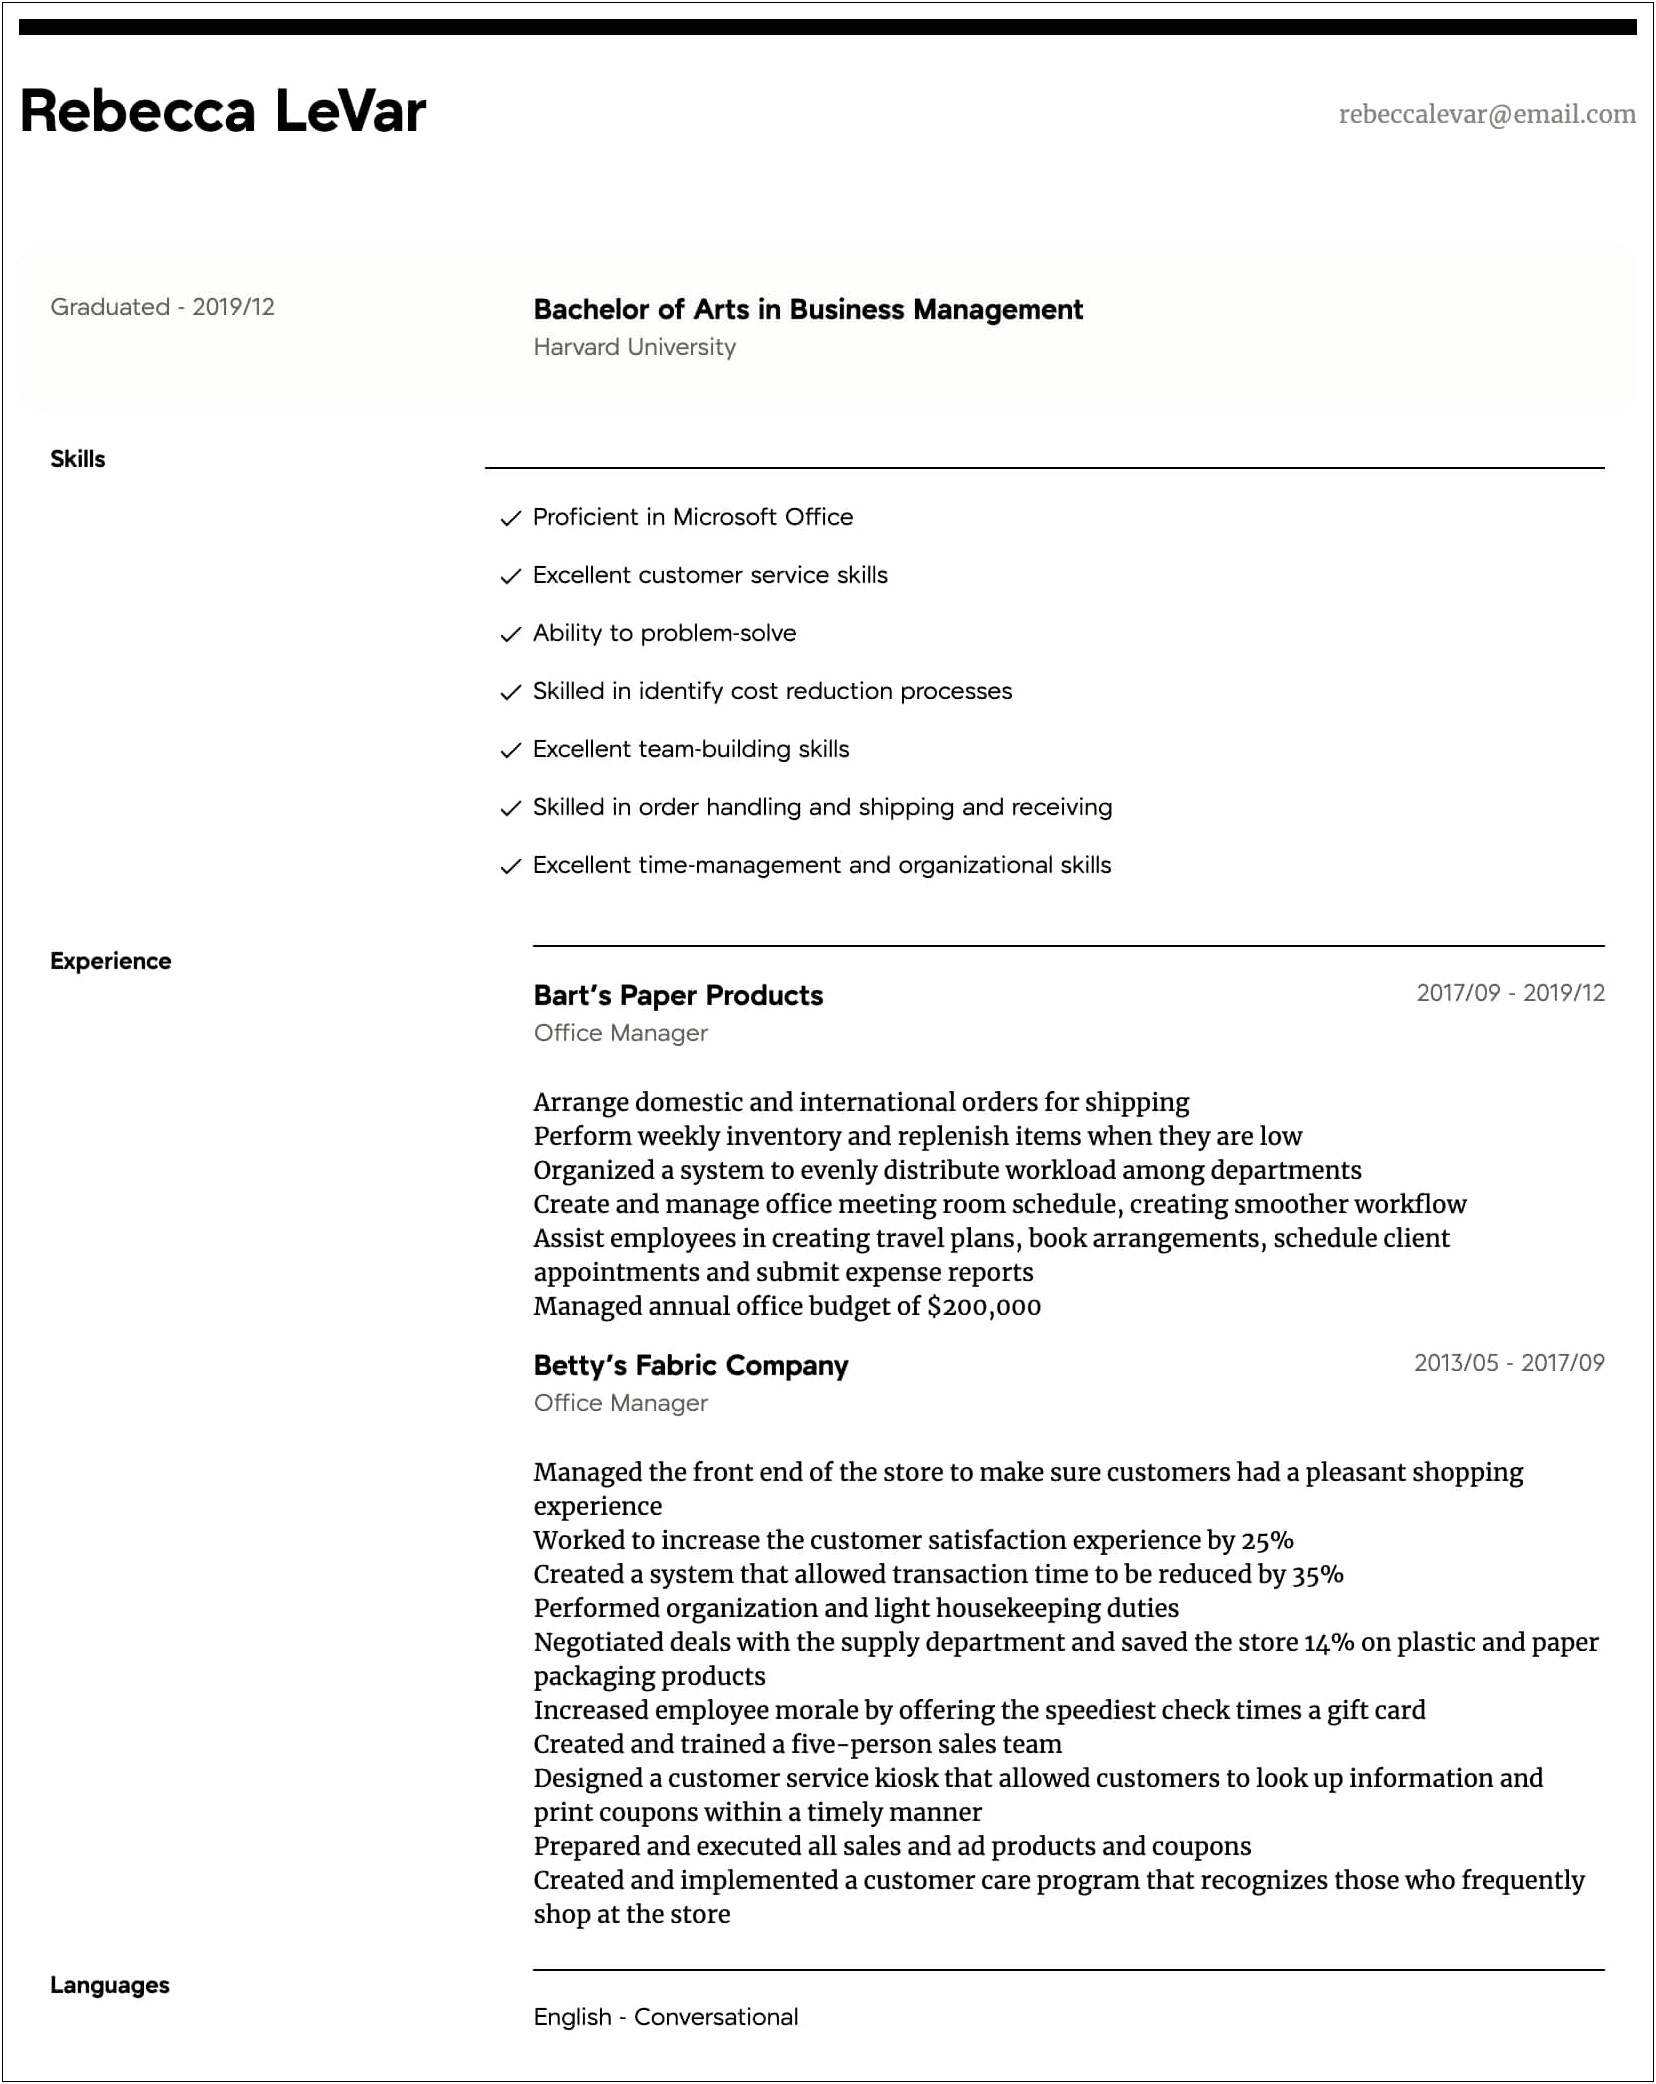 Example To Describe Domestic Skills For A Resume